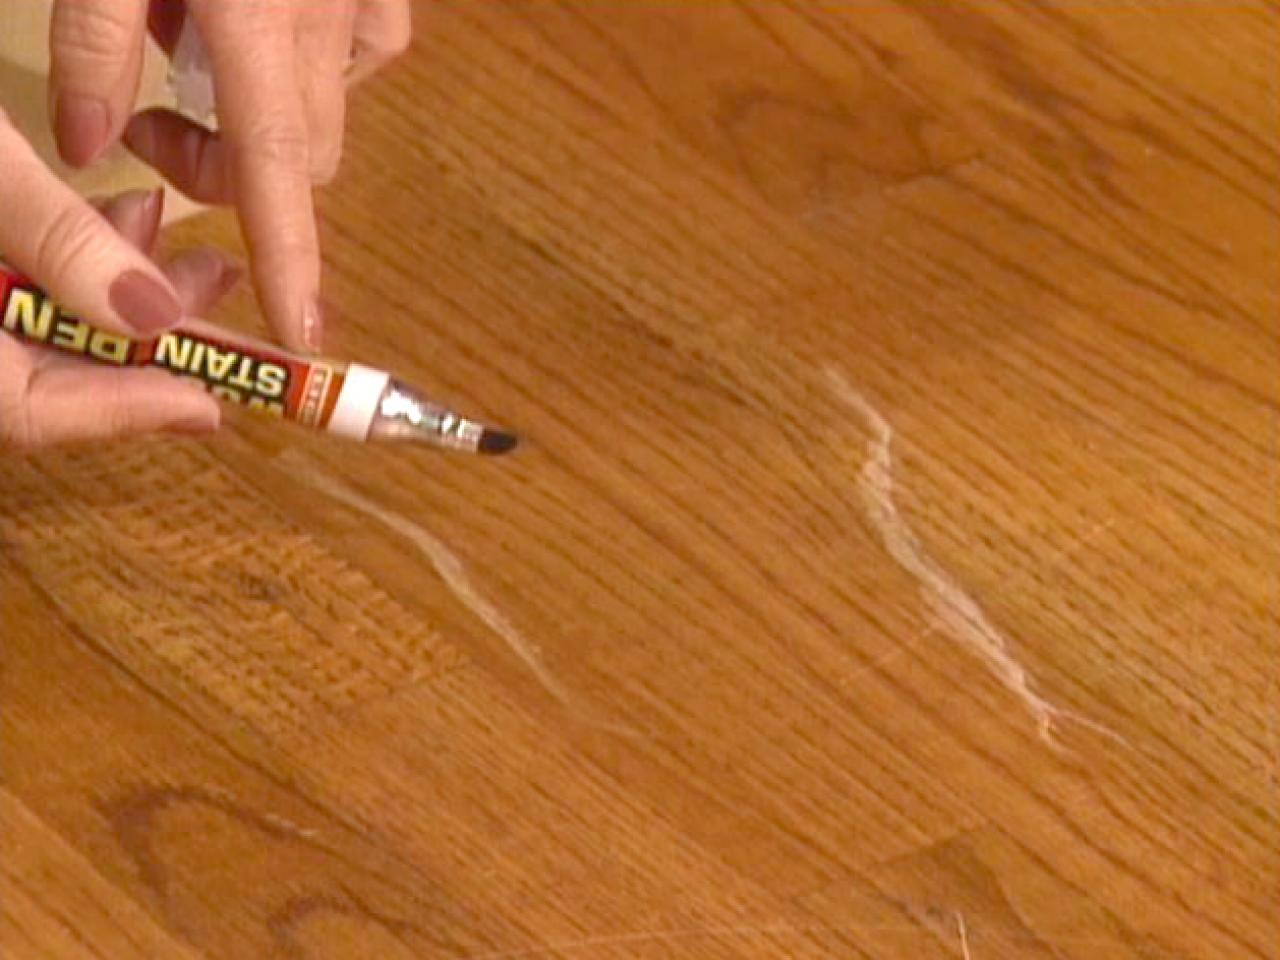 How To Touch Up Wood Floors Tos Diy, How To Get Scratches Out Of Hardwood Floors